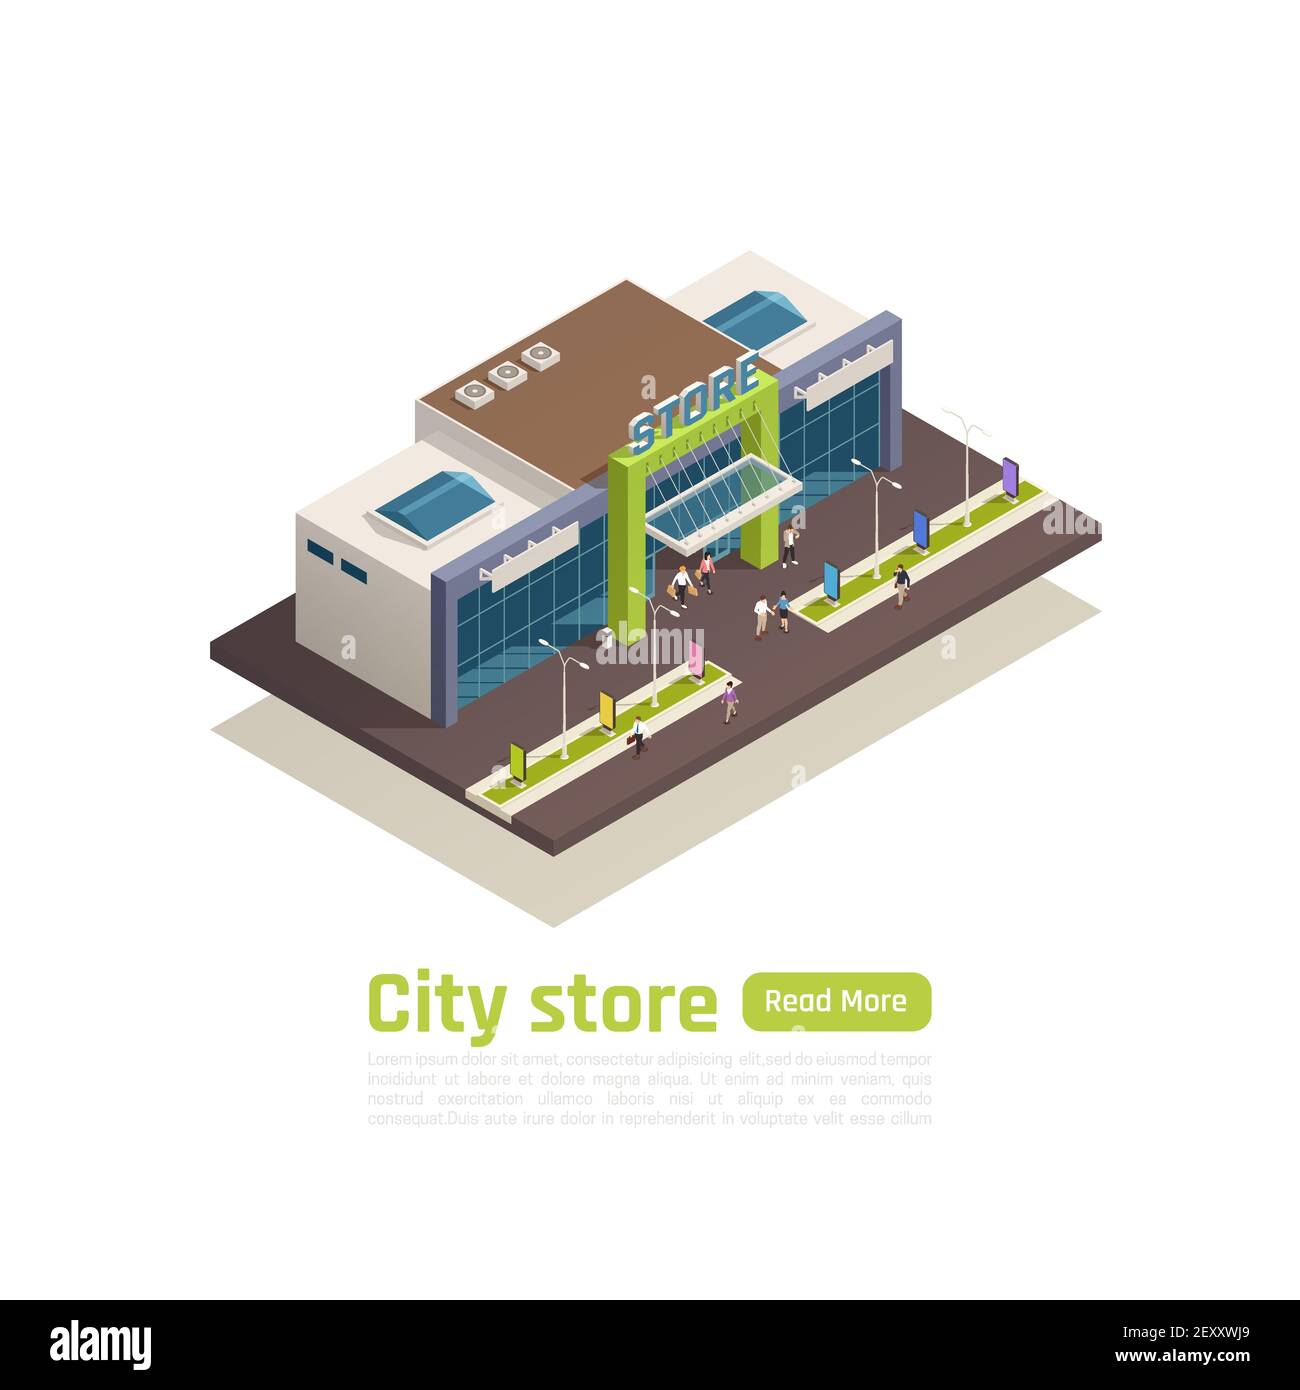 Store mall shopping center isometric composition with city store headline and green read more button vector illustration Stock Vector